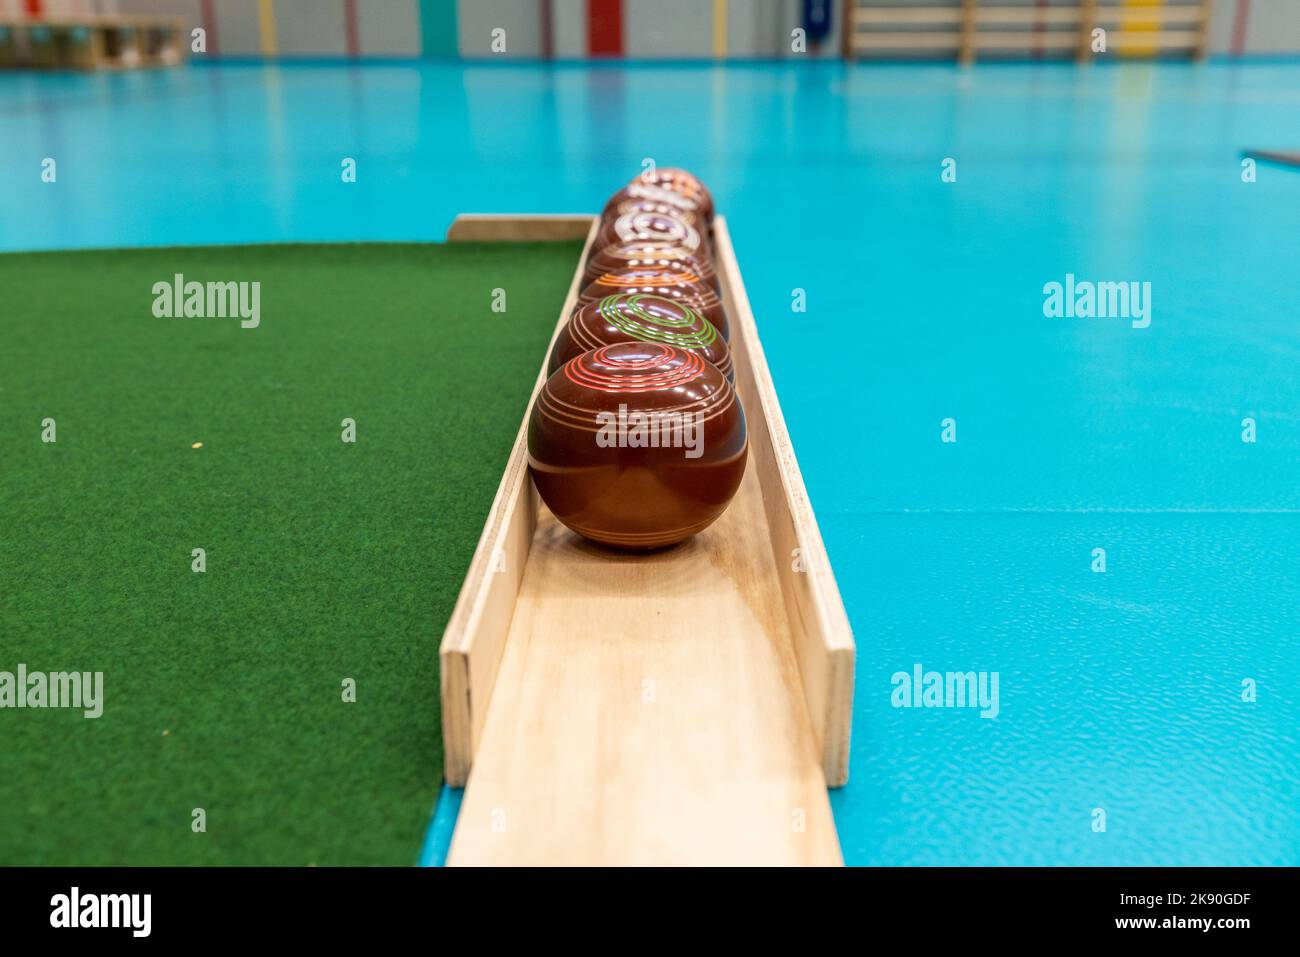 Indoor bowls carpets or lawn bowls or lawn bowling Stock Photo